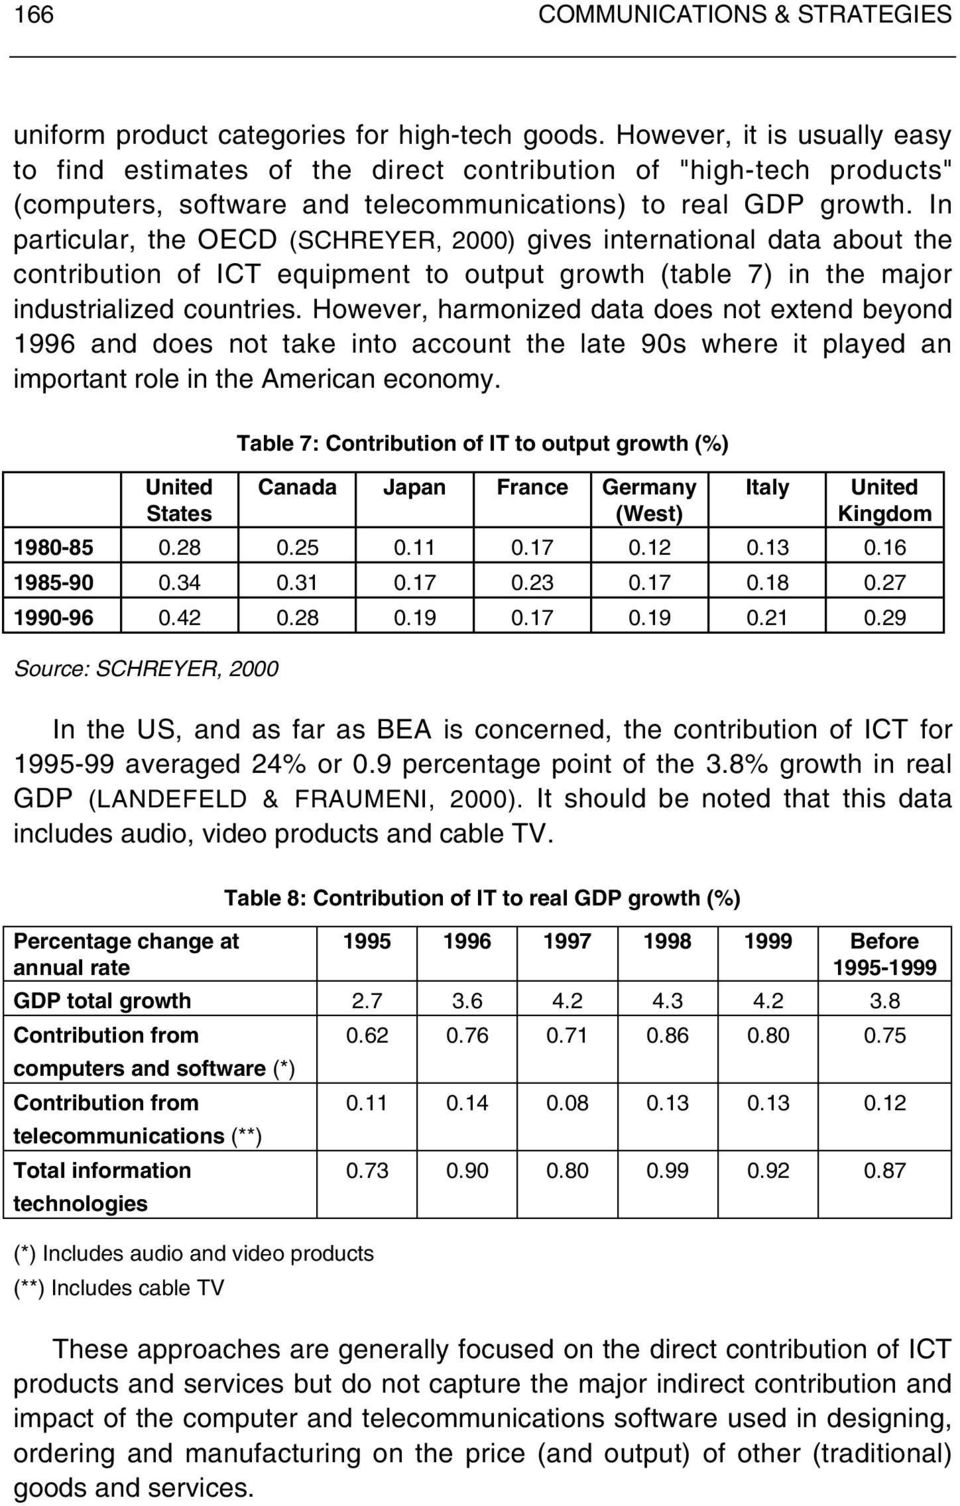 In particular, the OECD (SCHREYER, 2000) gives international data about the contribution of ICT equipment to output growth (table 7) in the major industrialized countries.